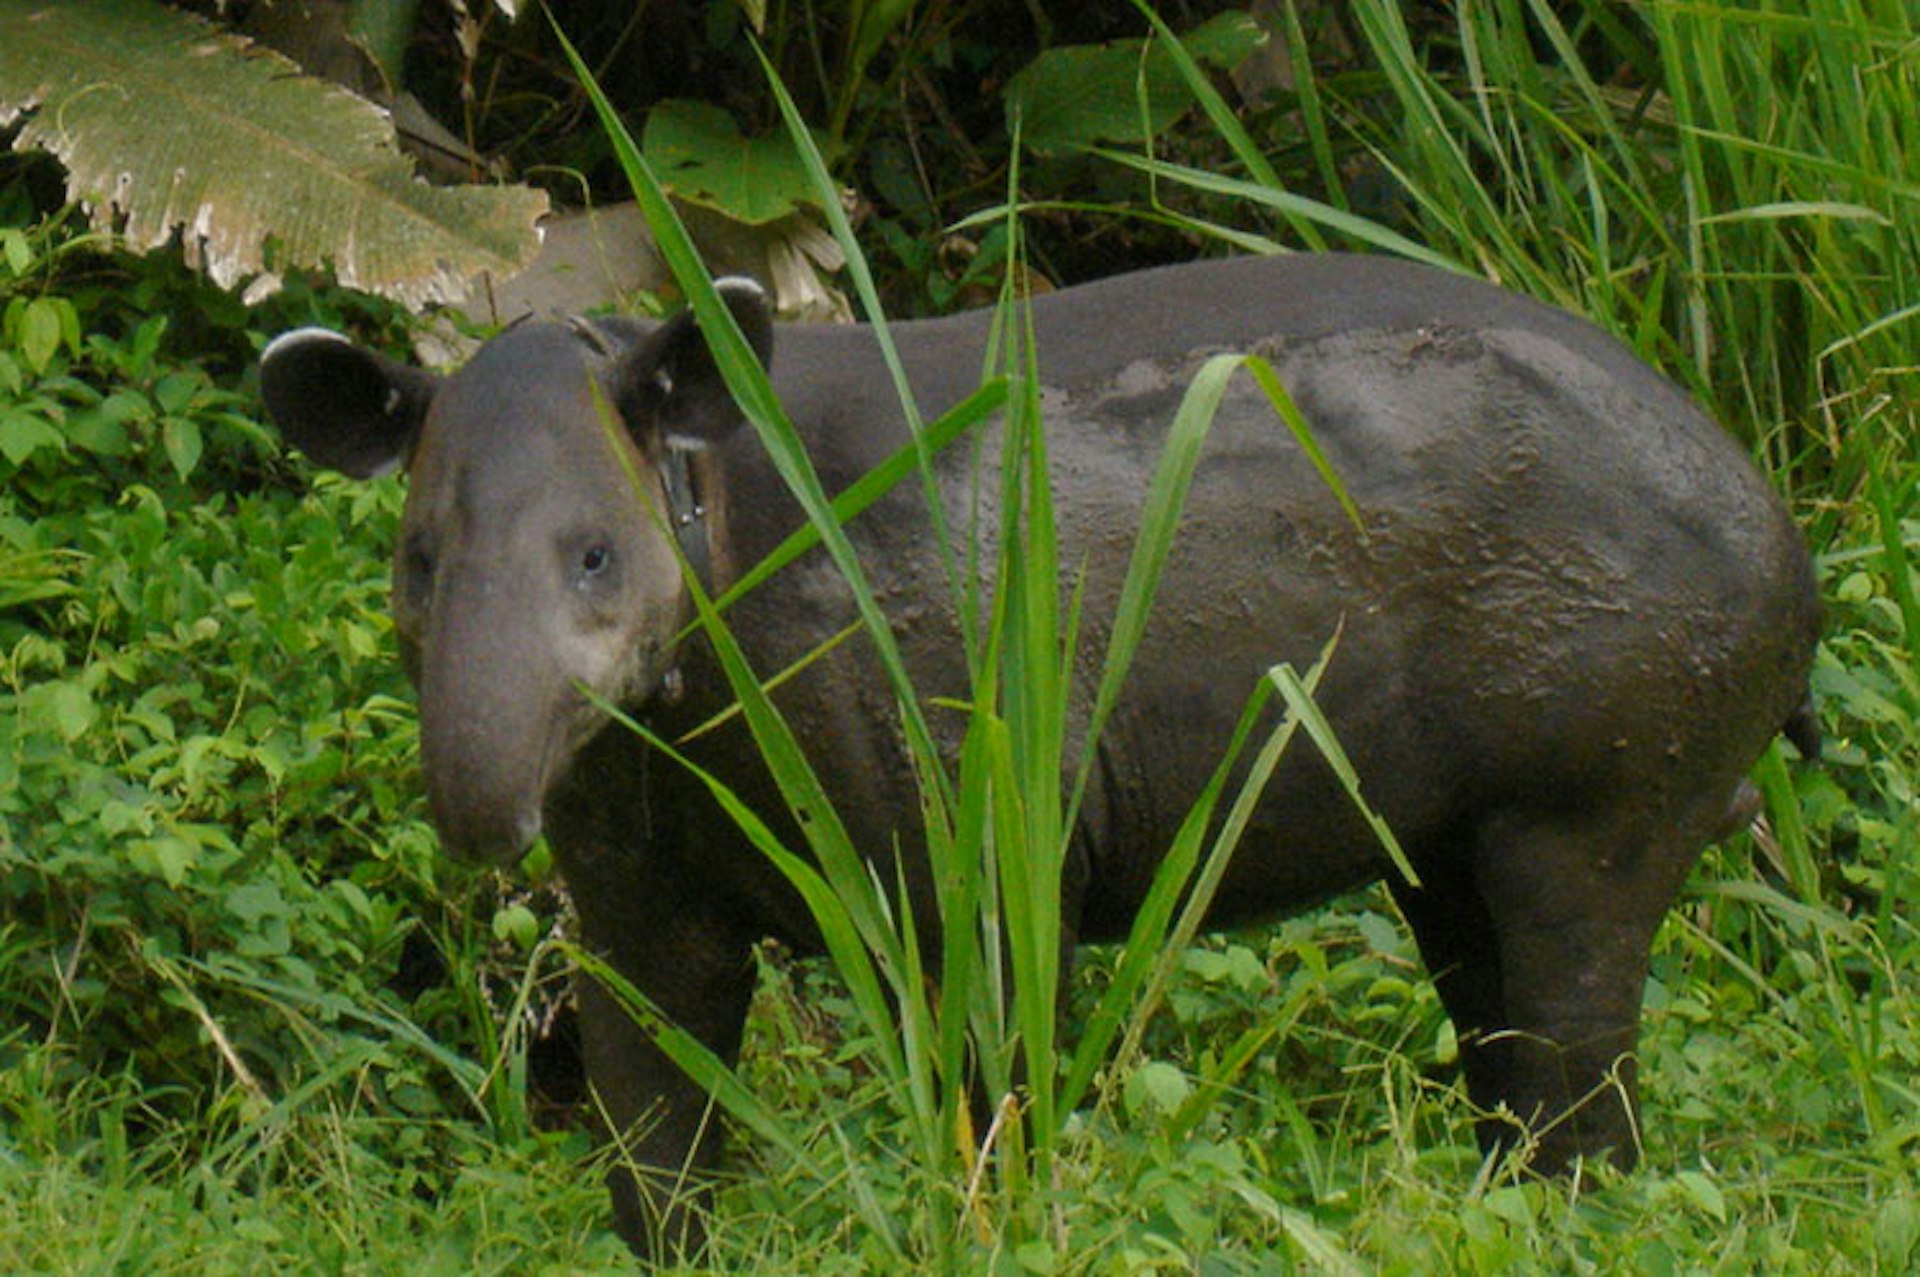 Baird's tapirs are a common sight in Corcovado National Park. Image by Miguel Vieira / CC BY 2.0